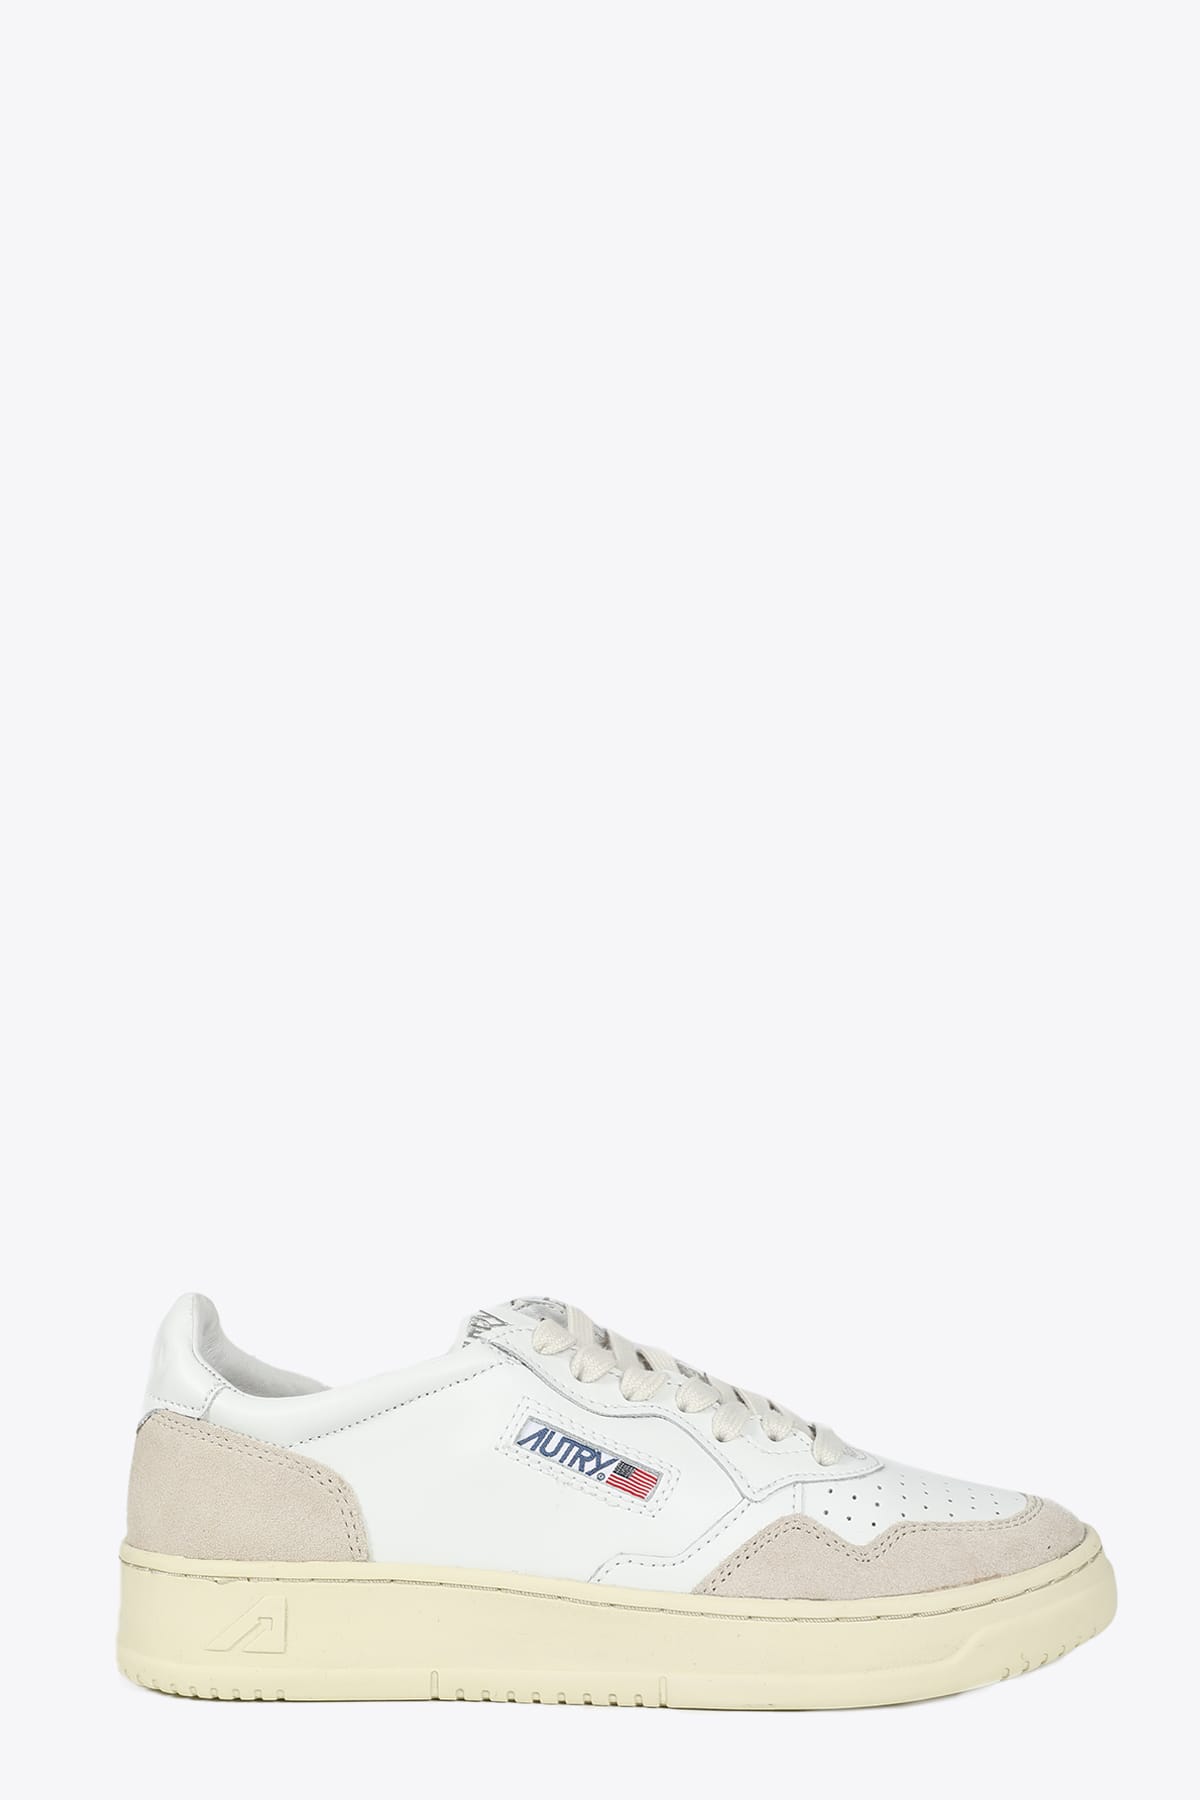 Autry 01 Low Man Leat/suede White leather low top sneaker - Medalist